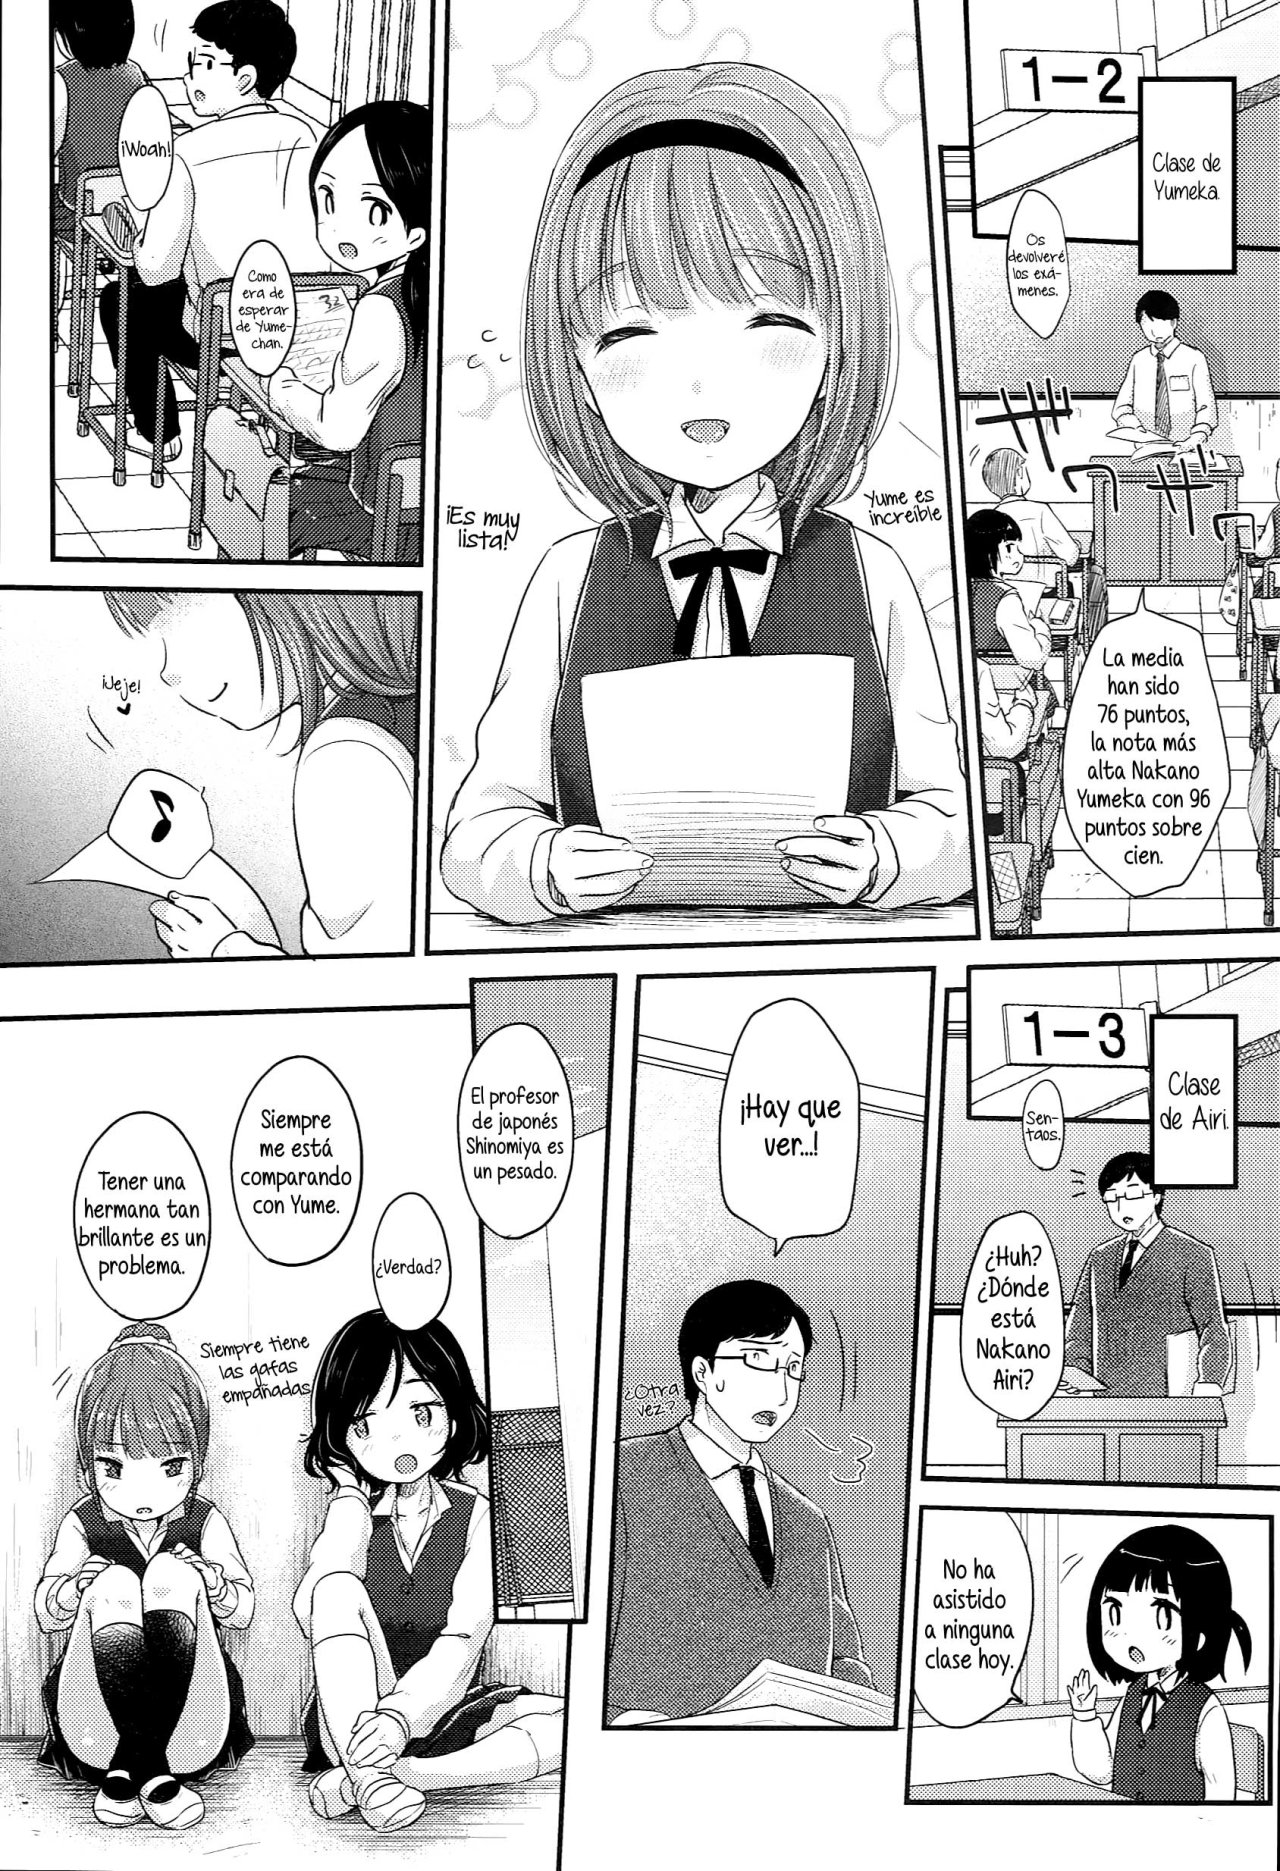 The strongest Twin Party Ch 1-2 - Yukiu Con - 2